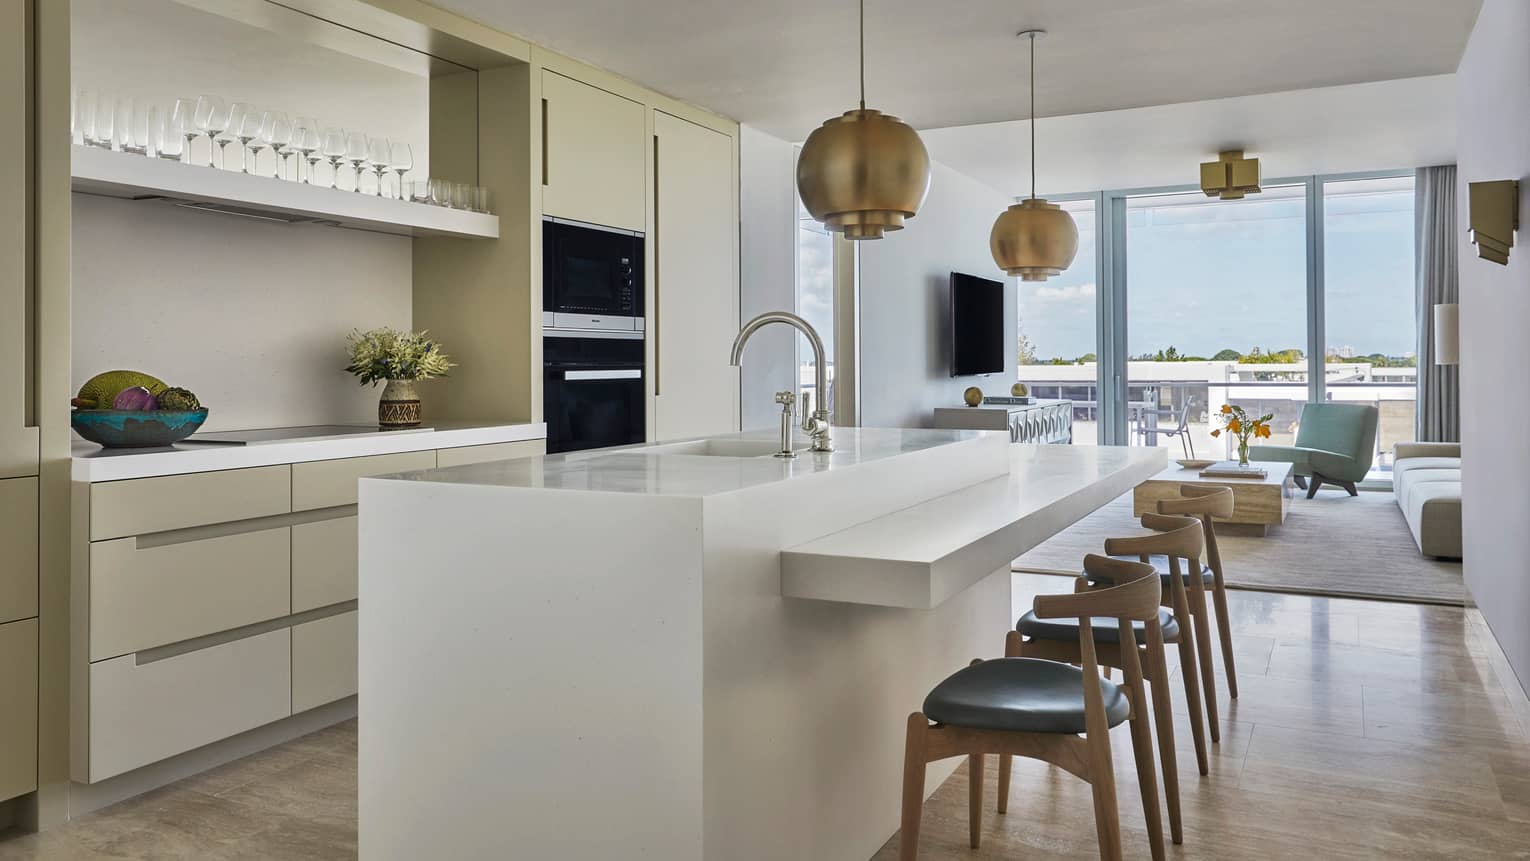 Long white island counter with stools in bright, modern kitchen